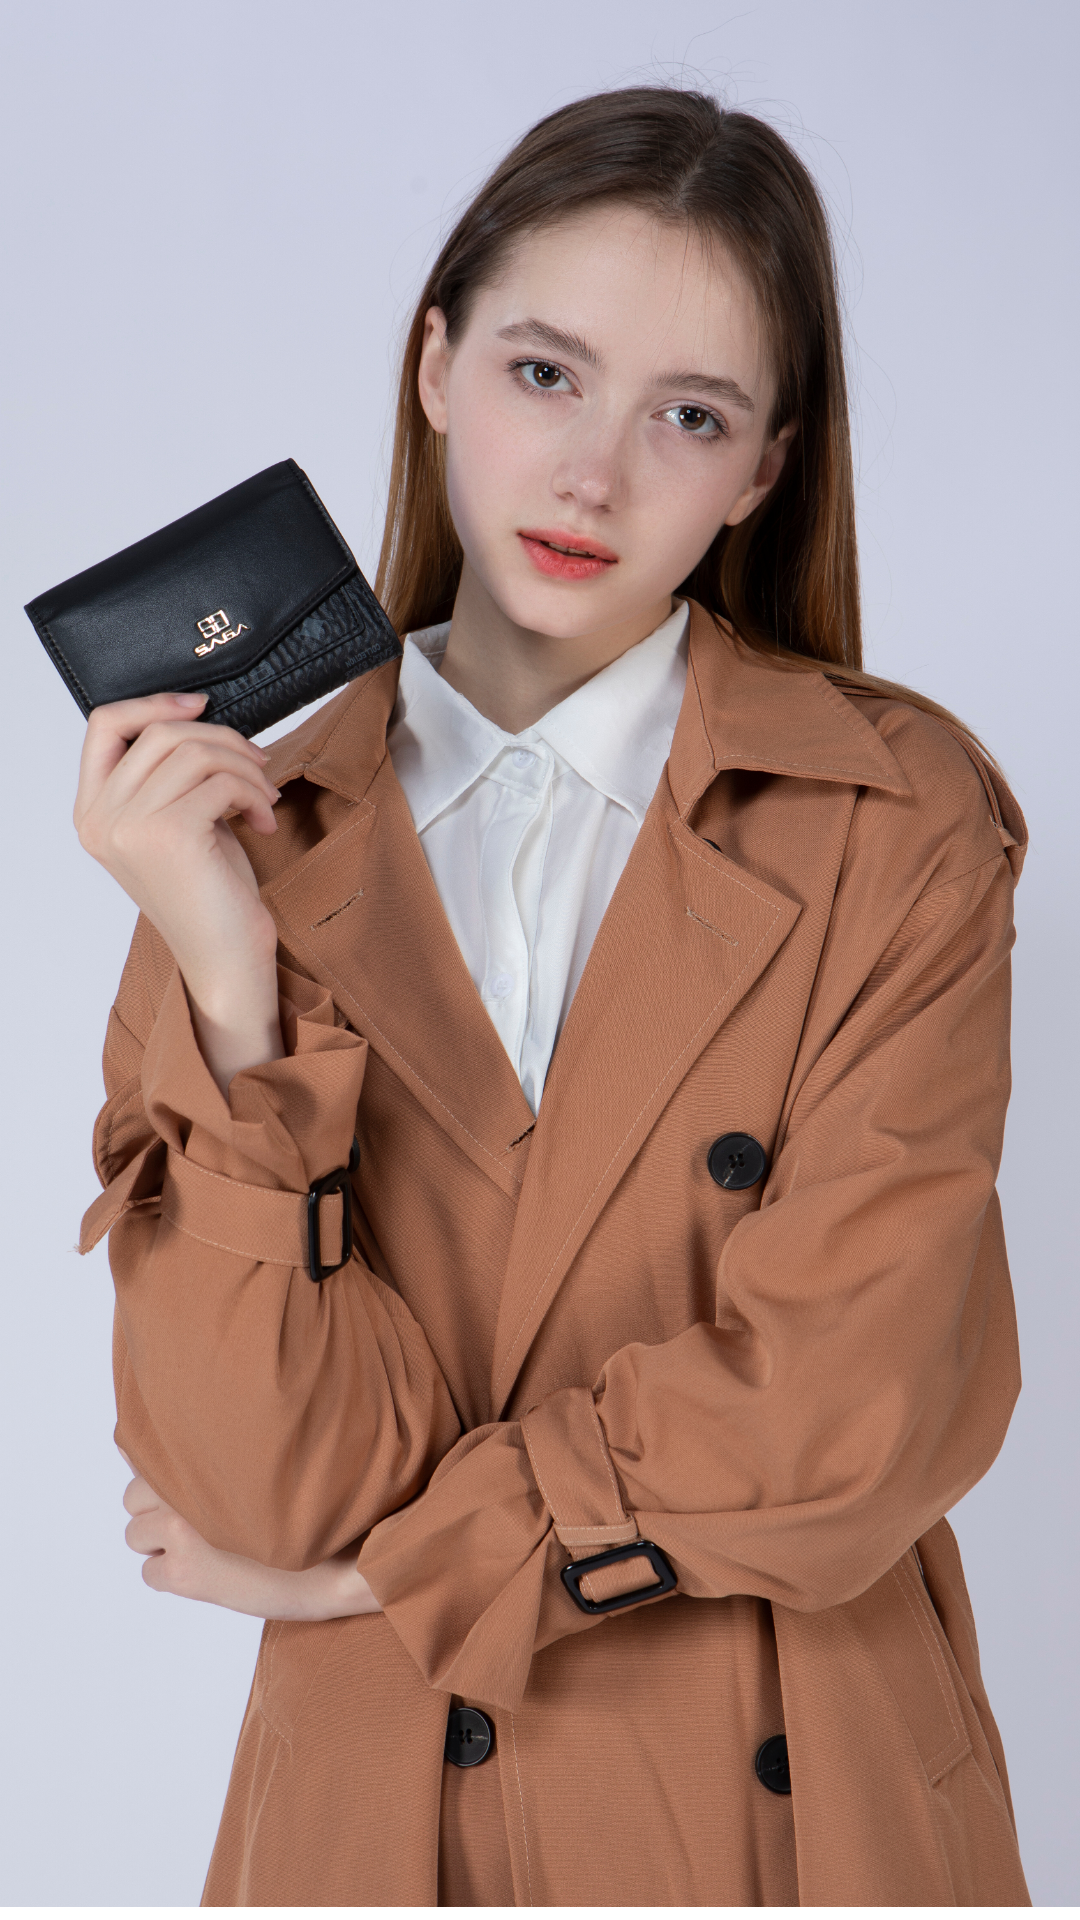 Women's wallet in black luxury leather with gold Saga logo